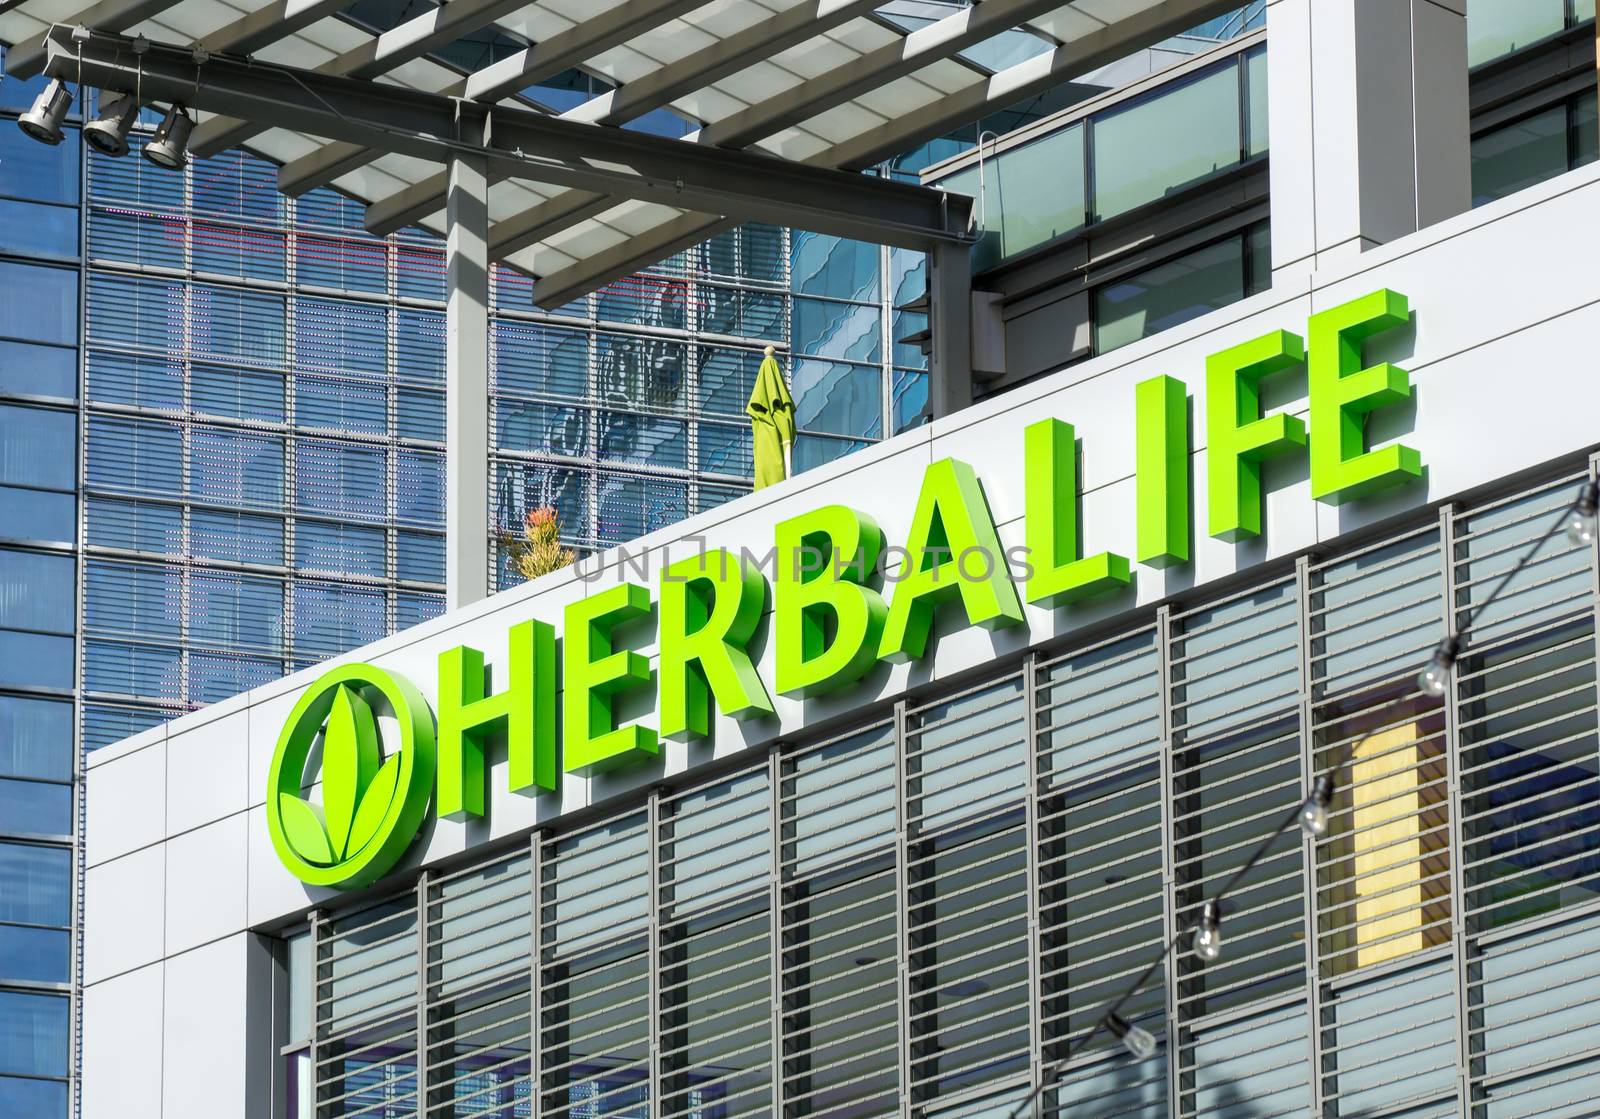 LOS ANGELES, CA/USA - December 6, 2015: Herbalife building and logo. Herbalife International is a multi-level marketing company that sells nutrition, weight management and skin-care products.